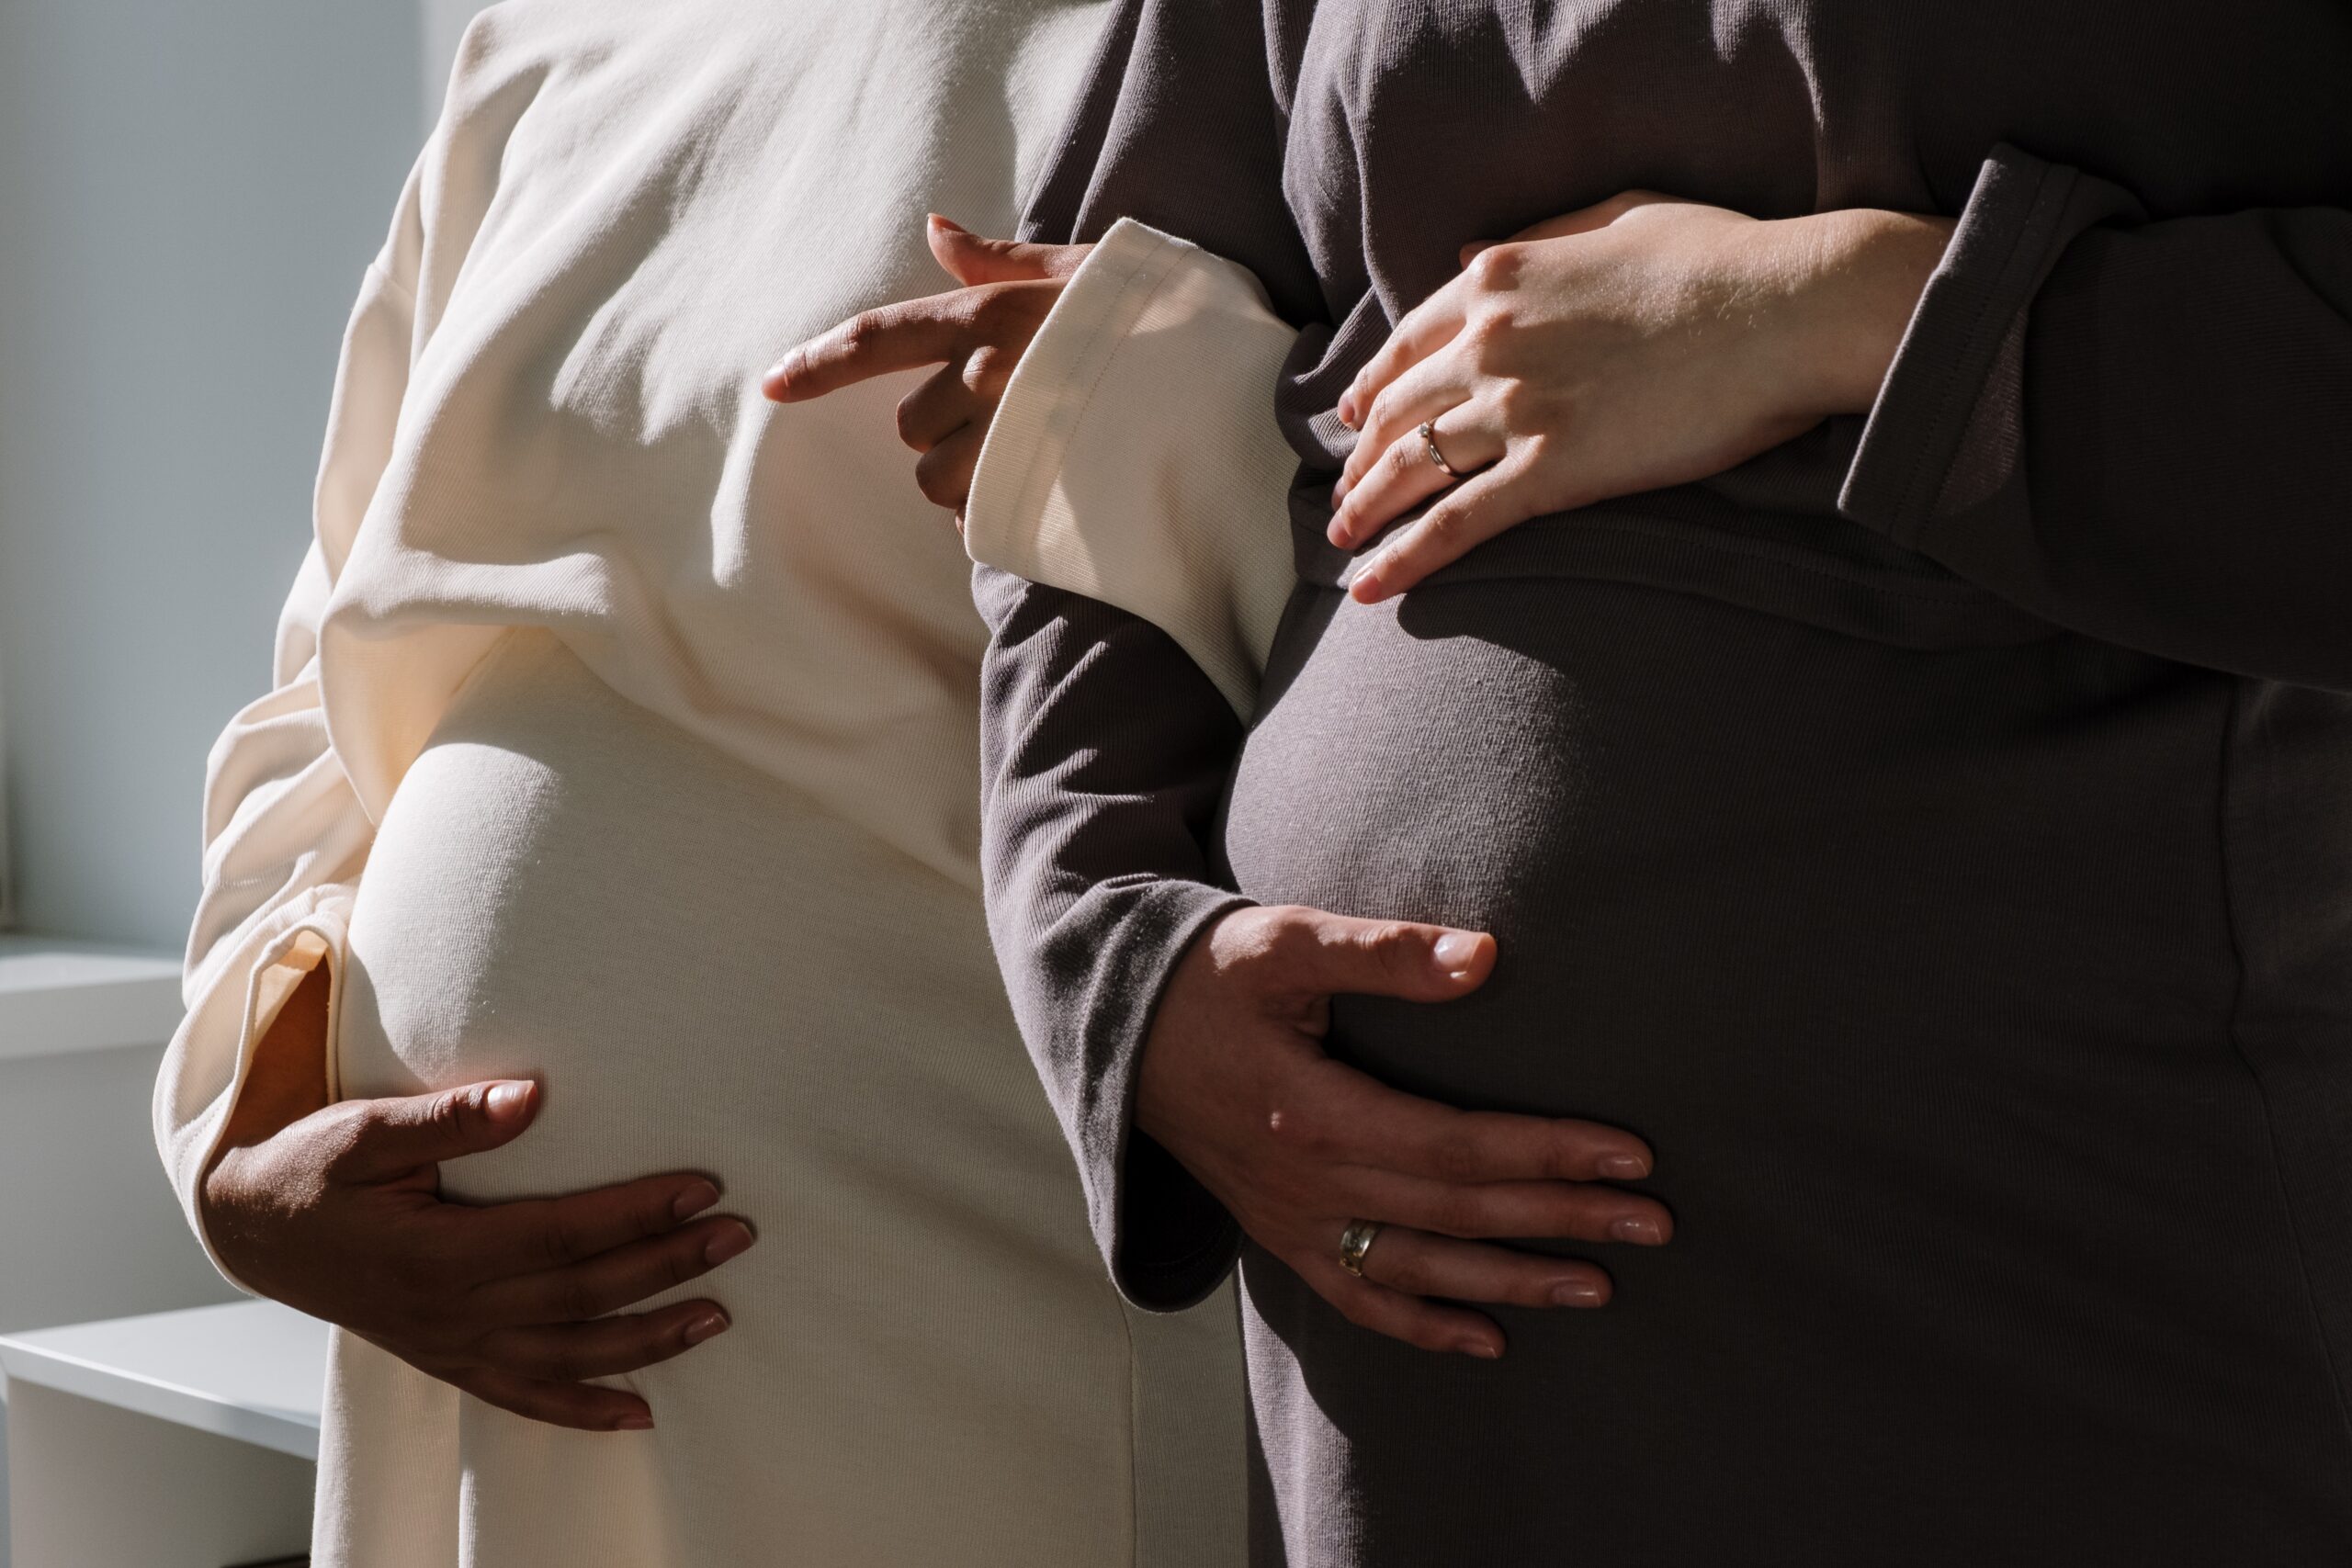 Childbearing Advice: Where to Get Help if Things Go Wrong